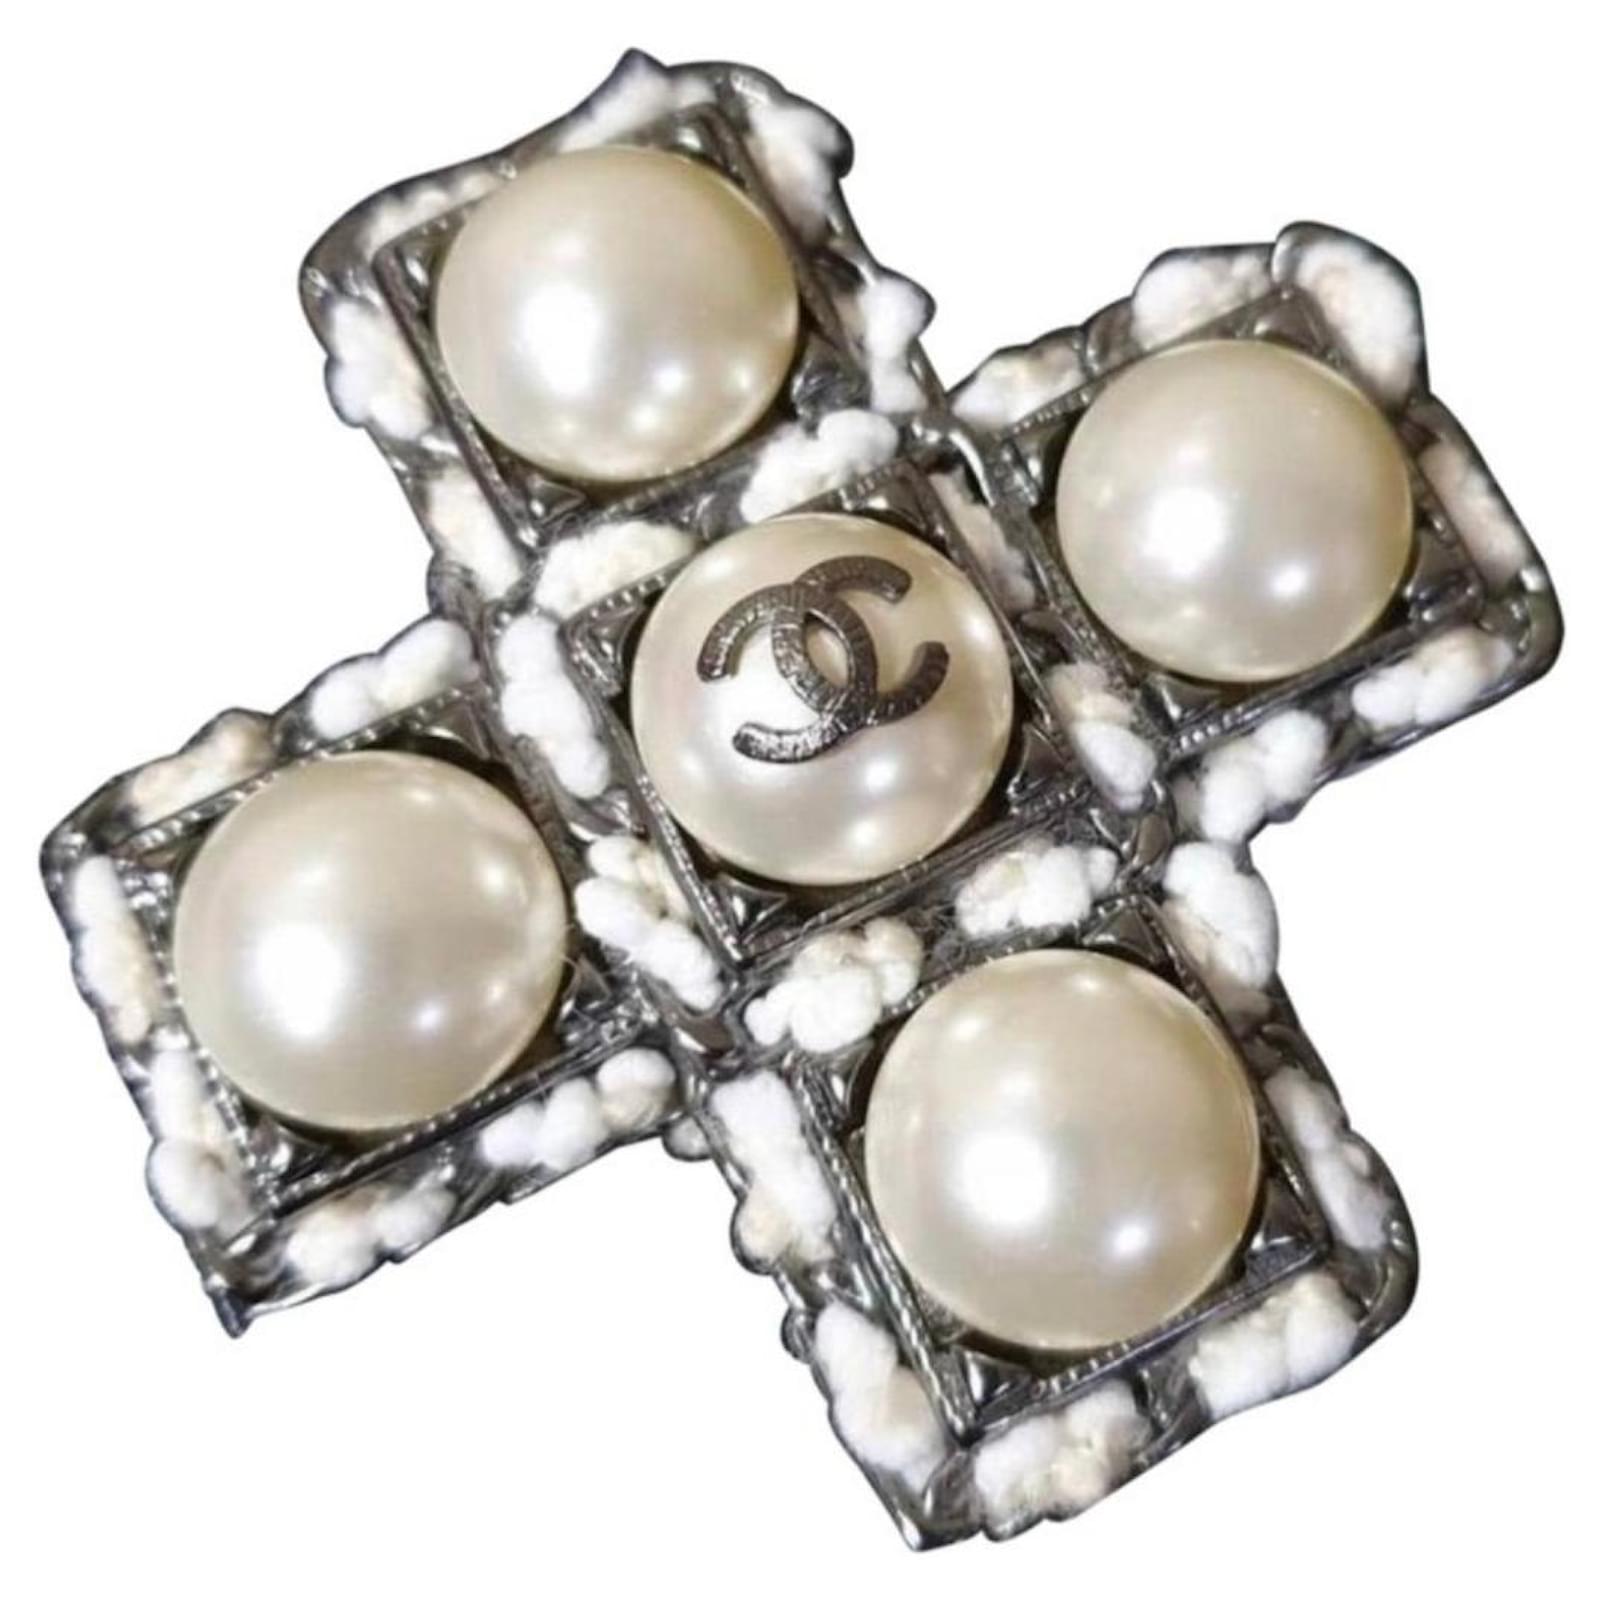 Pins & Brooches Chanel Chanel Silver Tone Metal & Faux Pearl 'CC' Cross Brooch